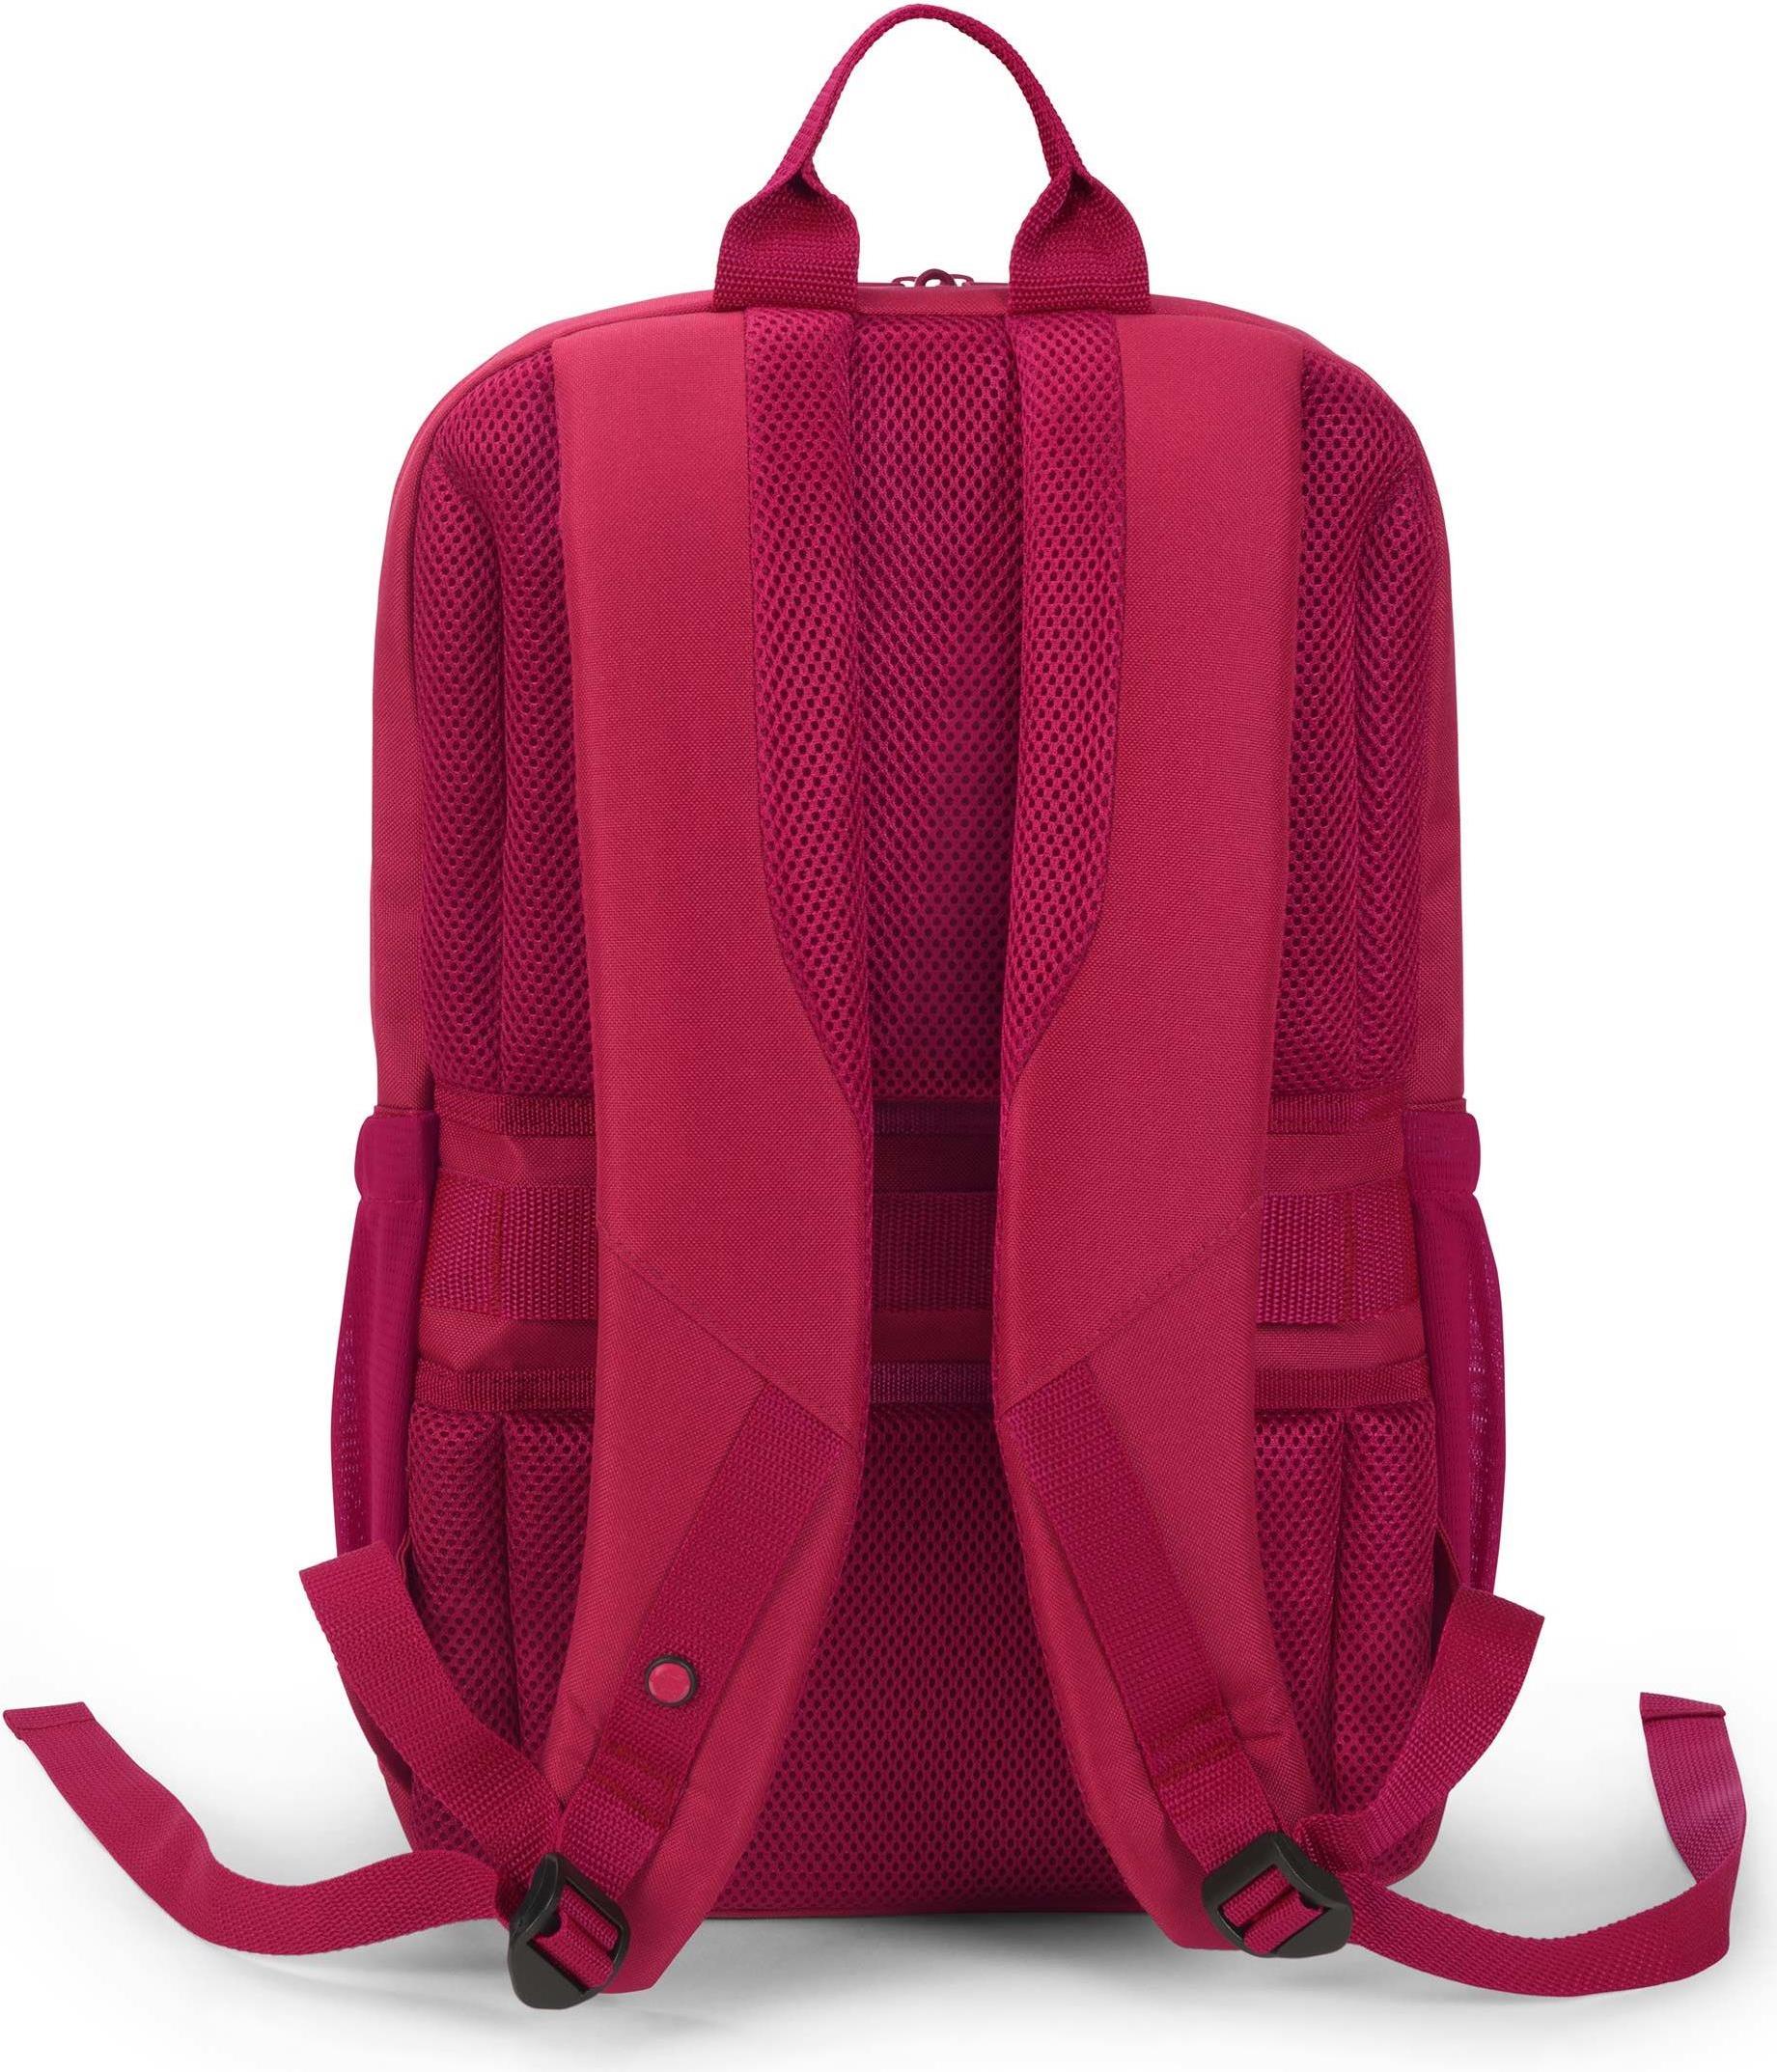 DICOTA Eco Backpack Scale (D31734)